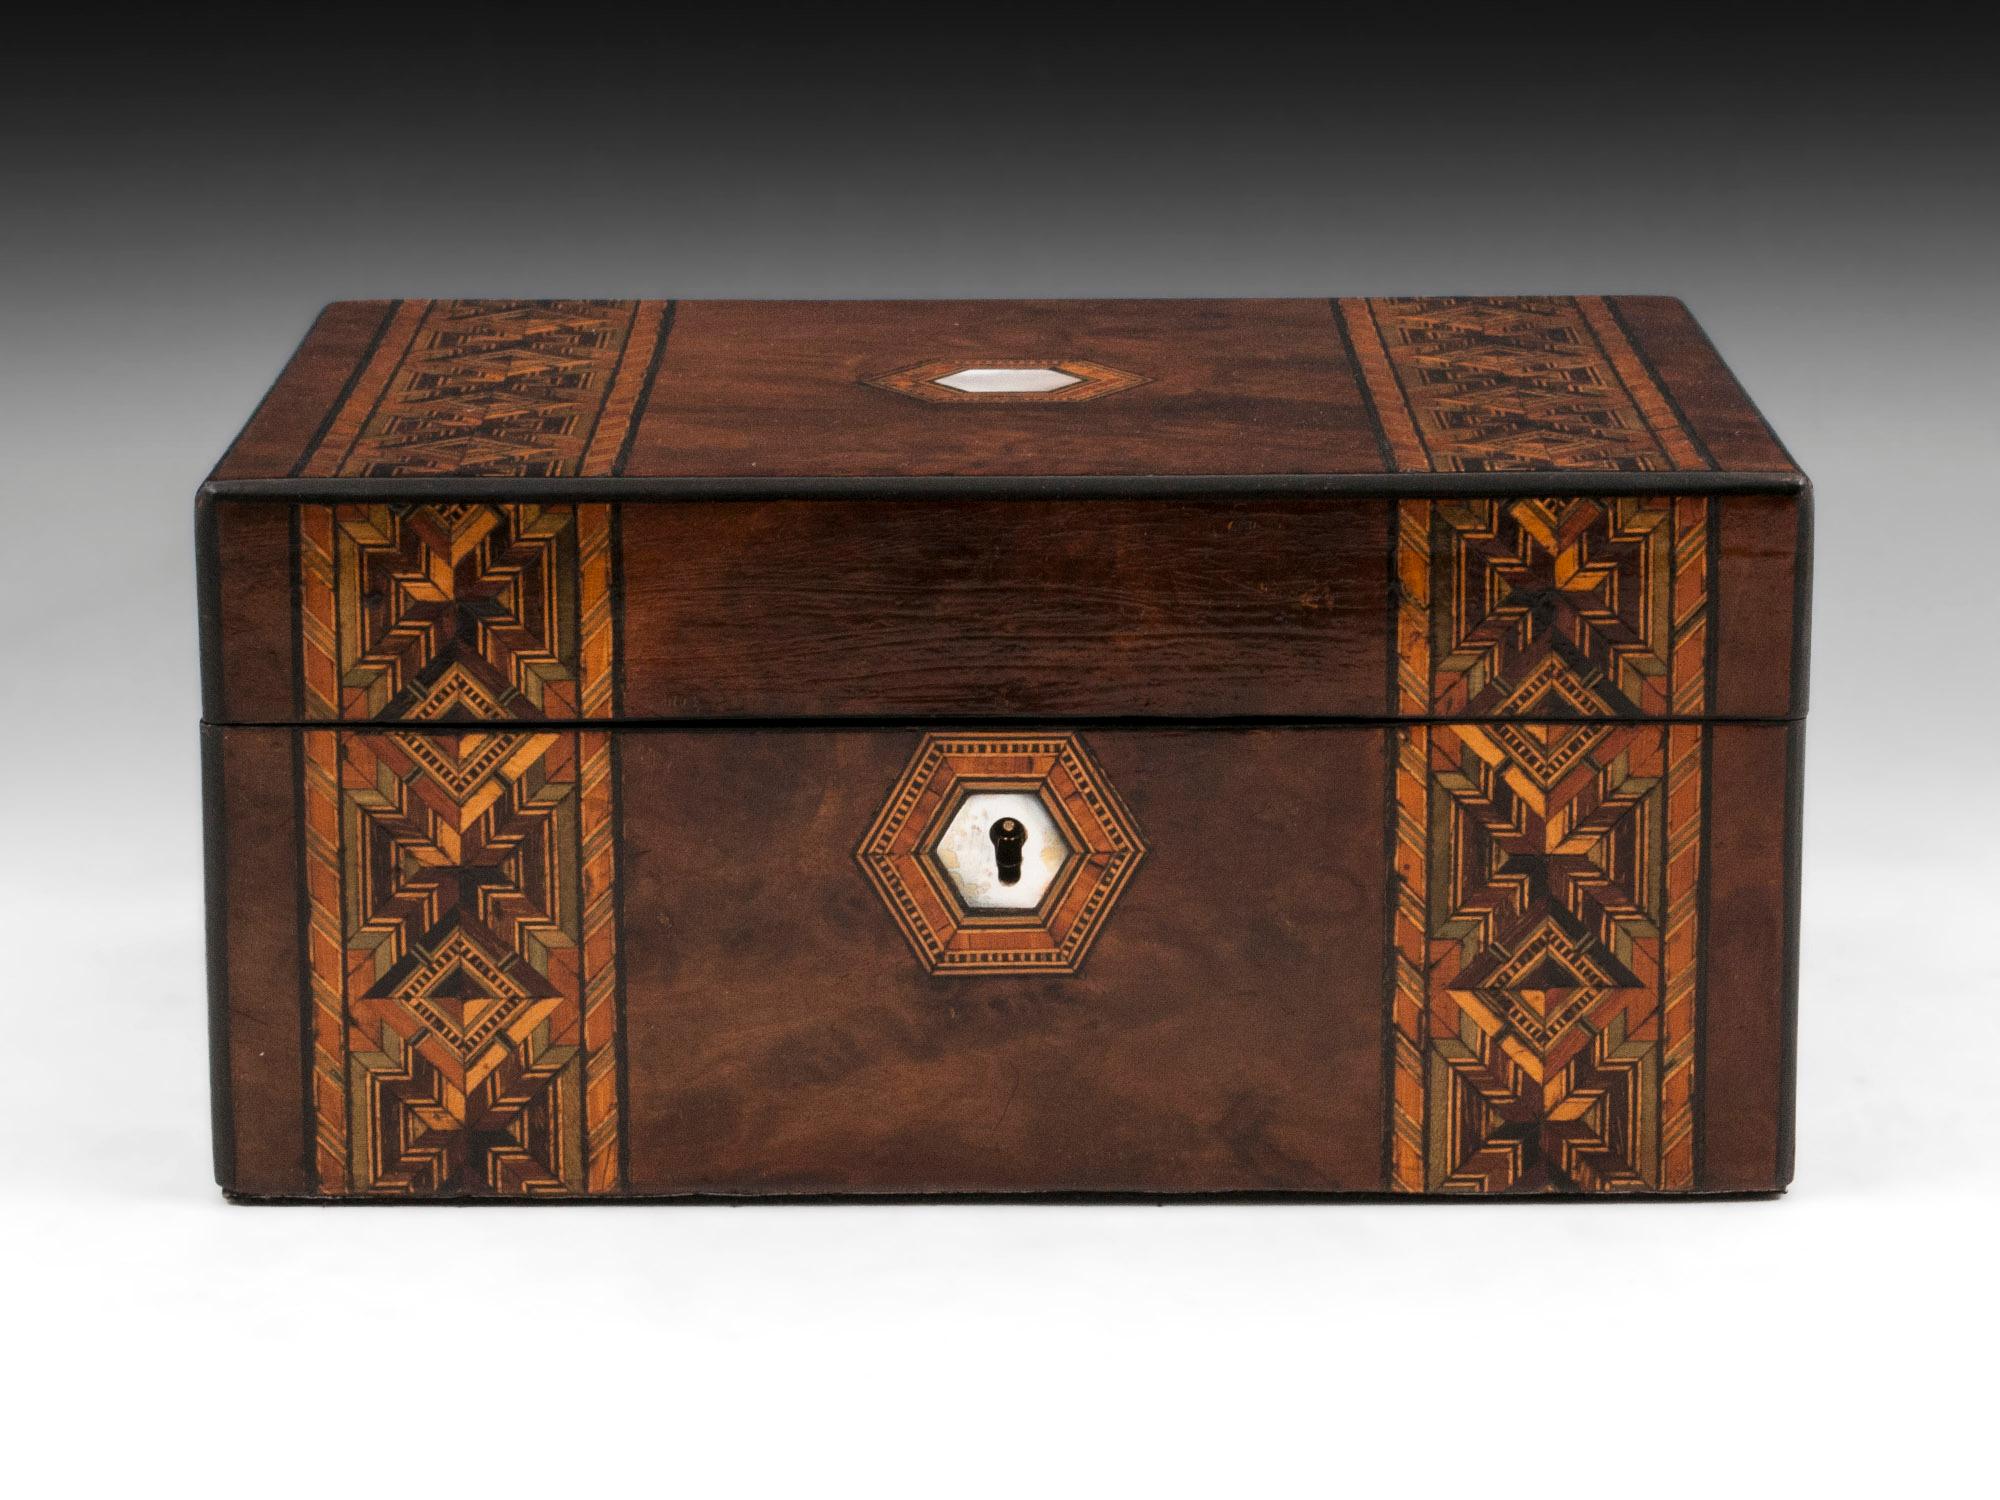 Antique jewelry box veneered in figured burr walnut with ebony edging and two decorative inlaid bands running from the front to the top of the box. With mother-of-pearl initial plate and escutcheon. 

The interior of this antique jewelry box